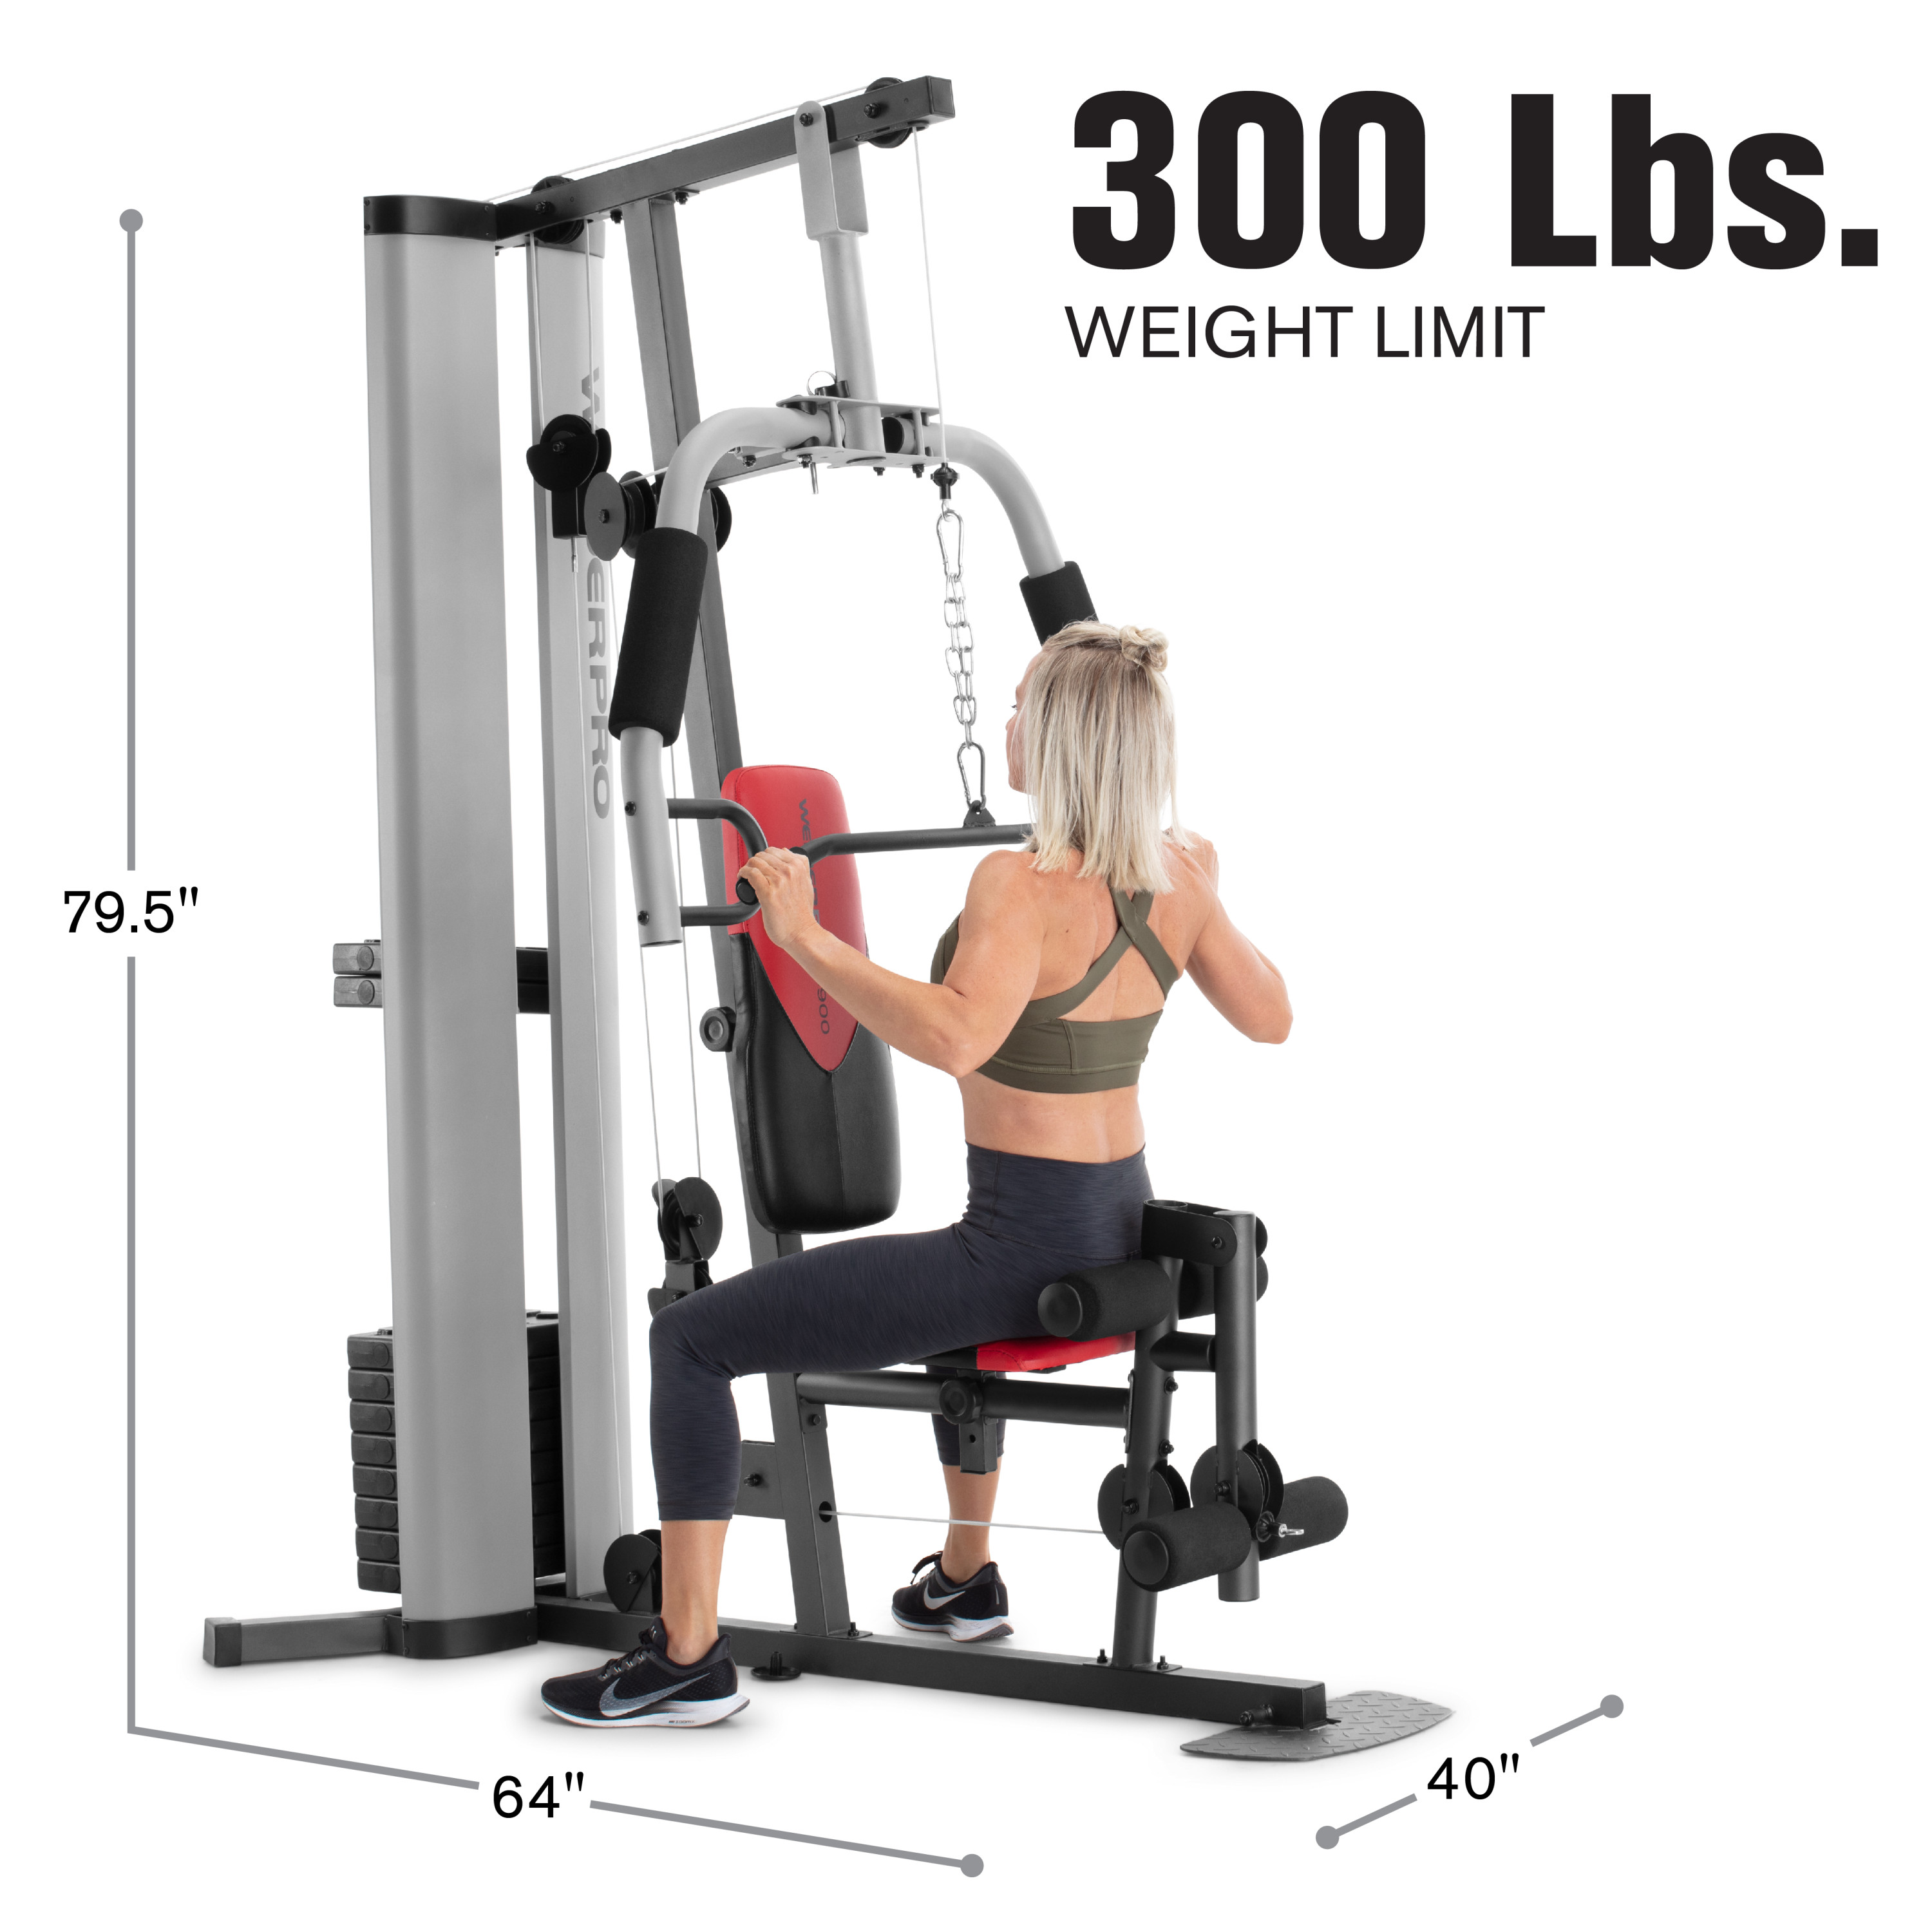 Weider Pro 6900 Home Gym System with 125 Lb. Weight Stack - image 3 of 39